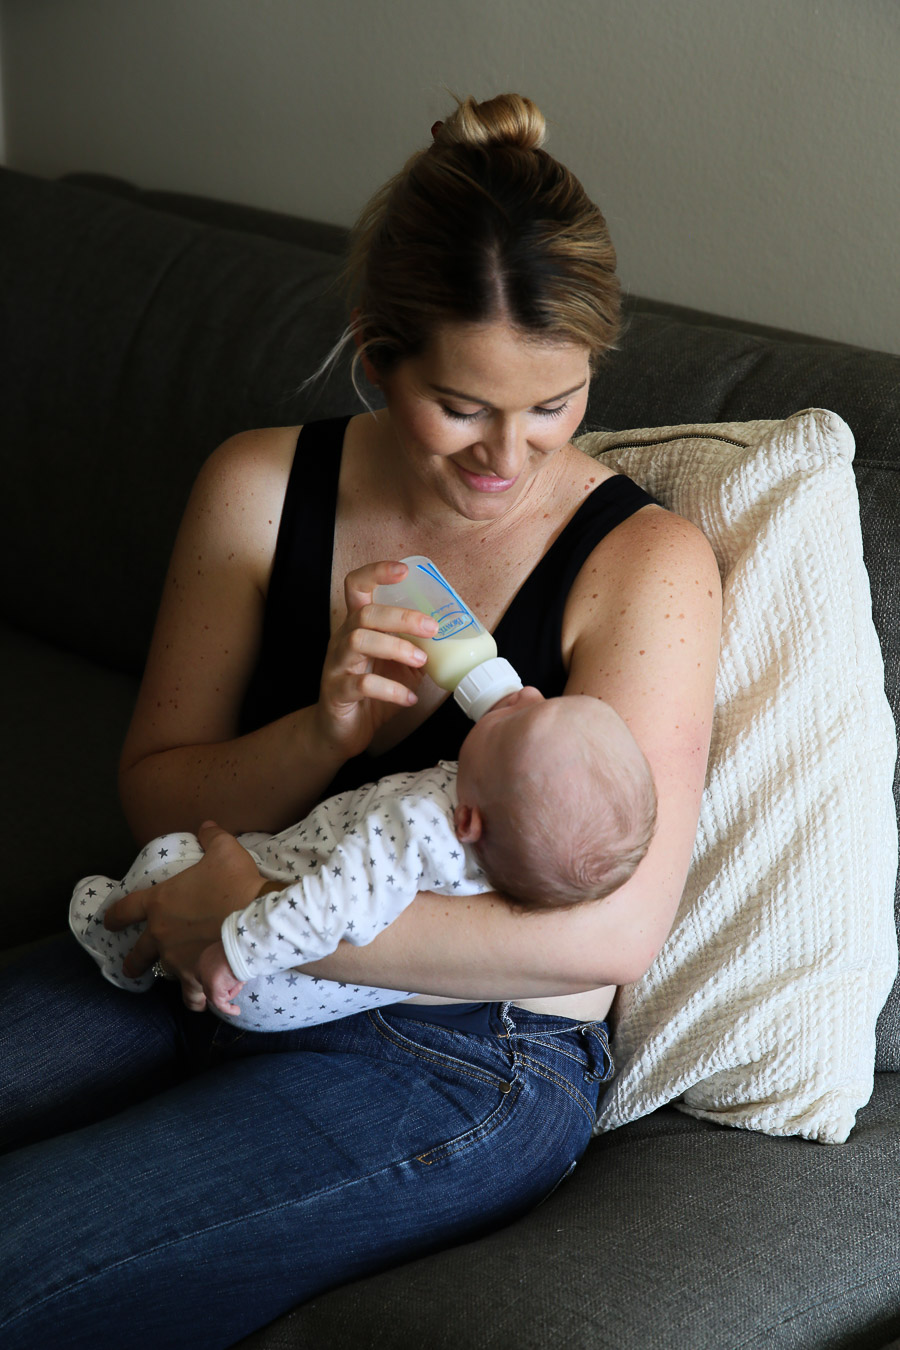 Breastfeeding Story - Pumping and Supplementing with Formula